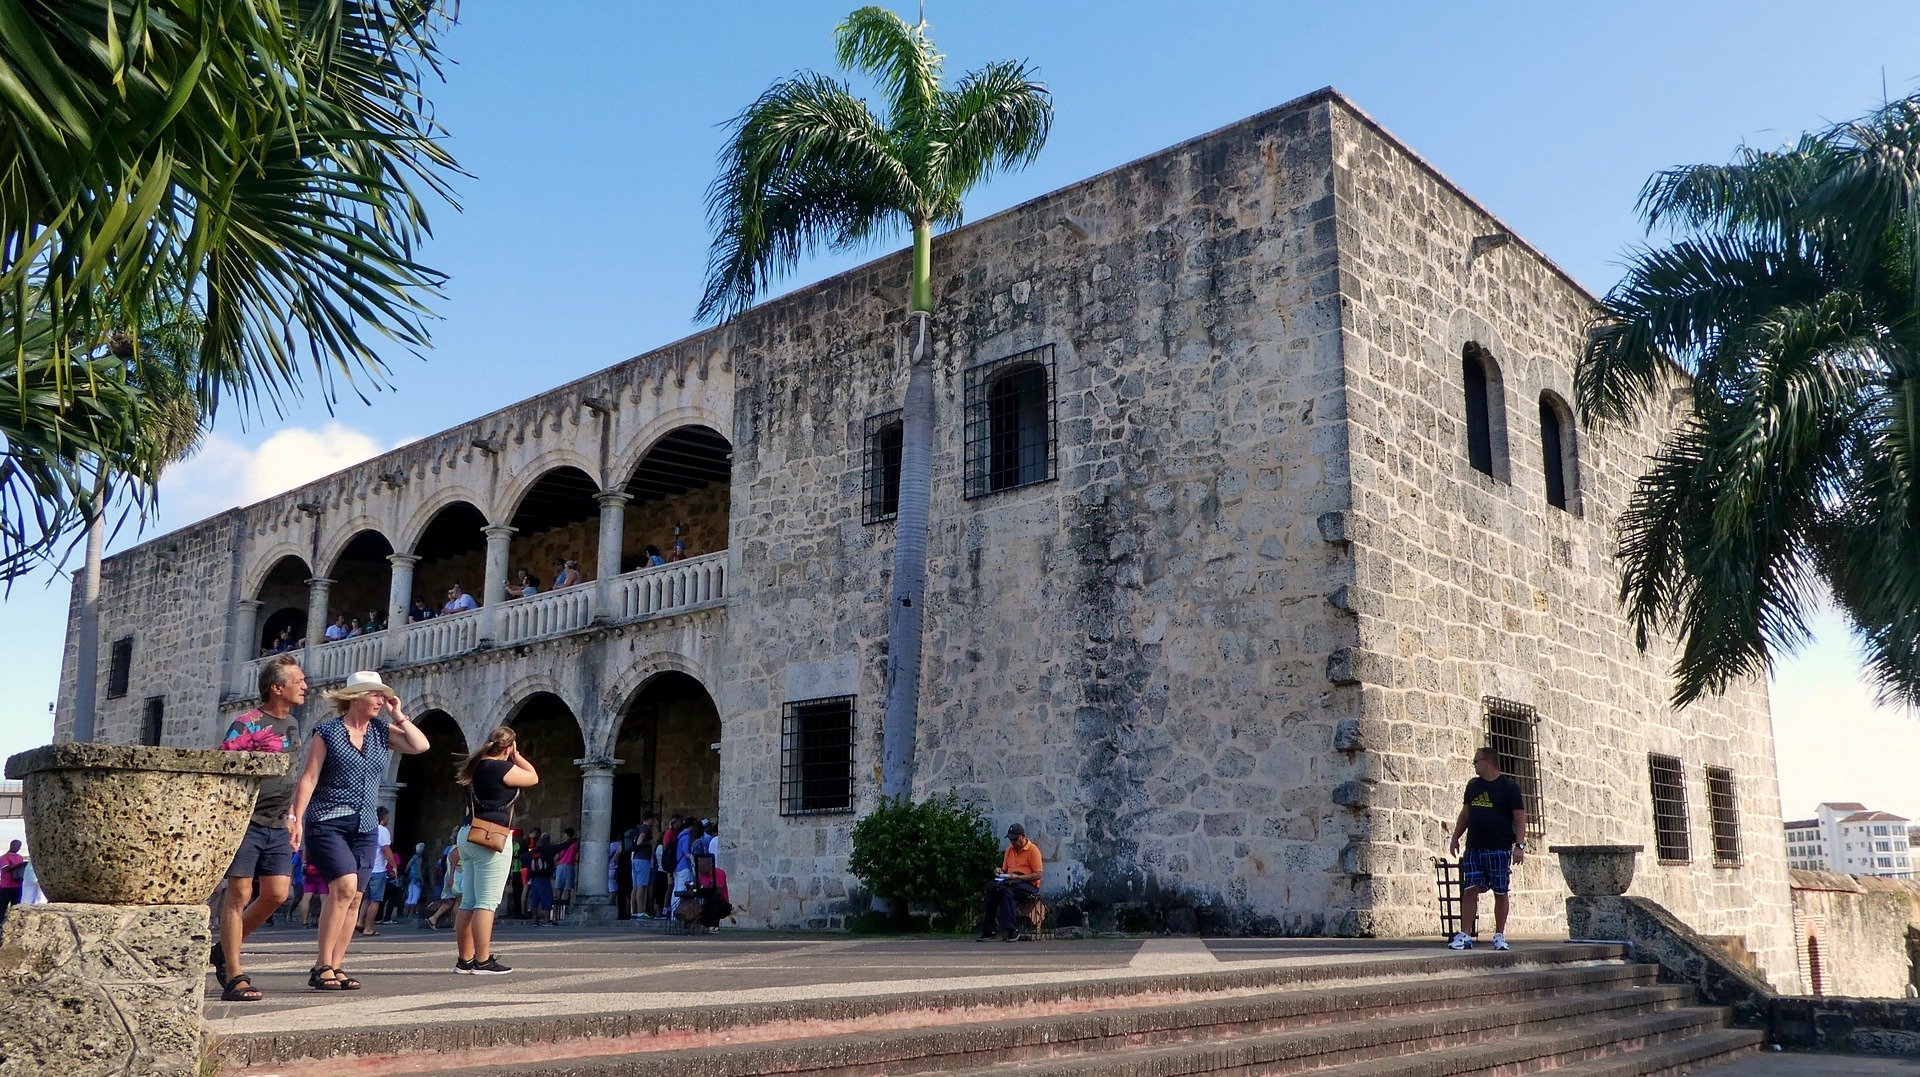 How To Get From La Romana To Santo Domingo - All Possible Ways, cheapest way from La Romana to Santo Domingo, La Romana to Santo Domingo, La Romana Bus, La Romana Bus to Santo Domingo